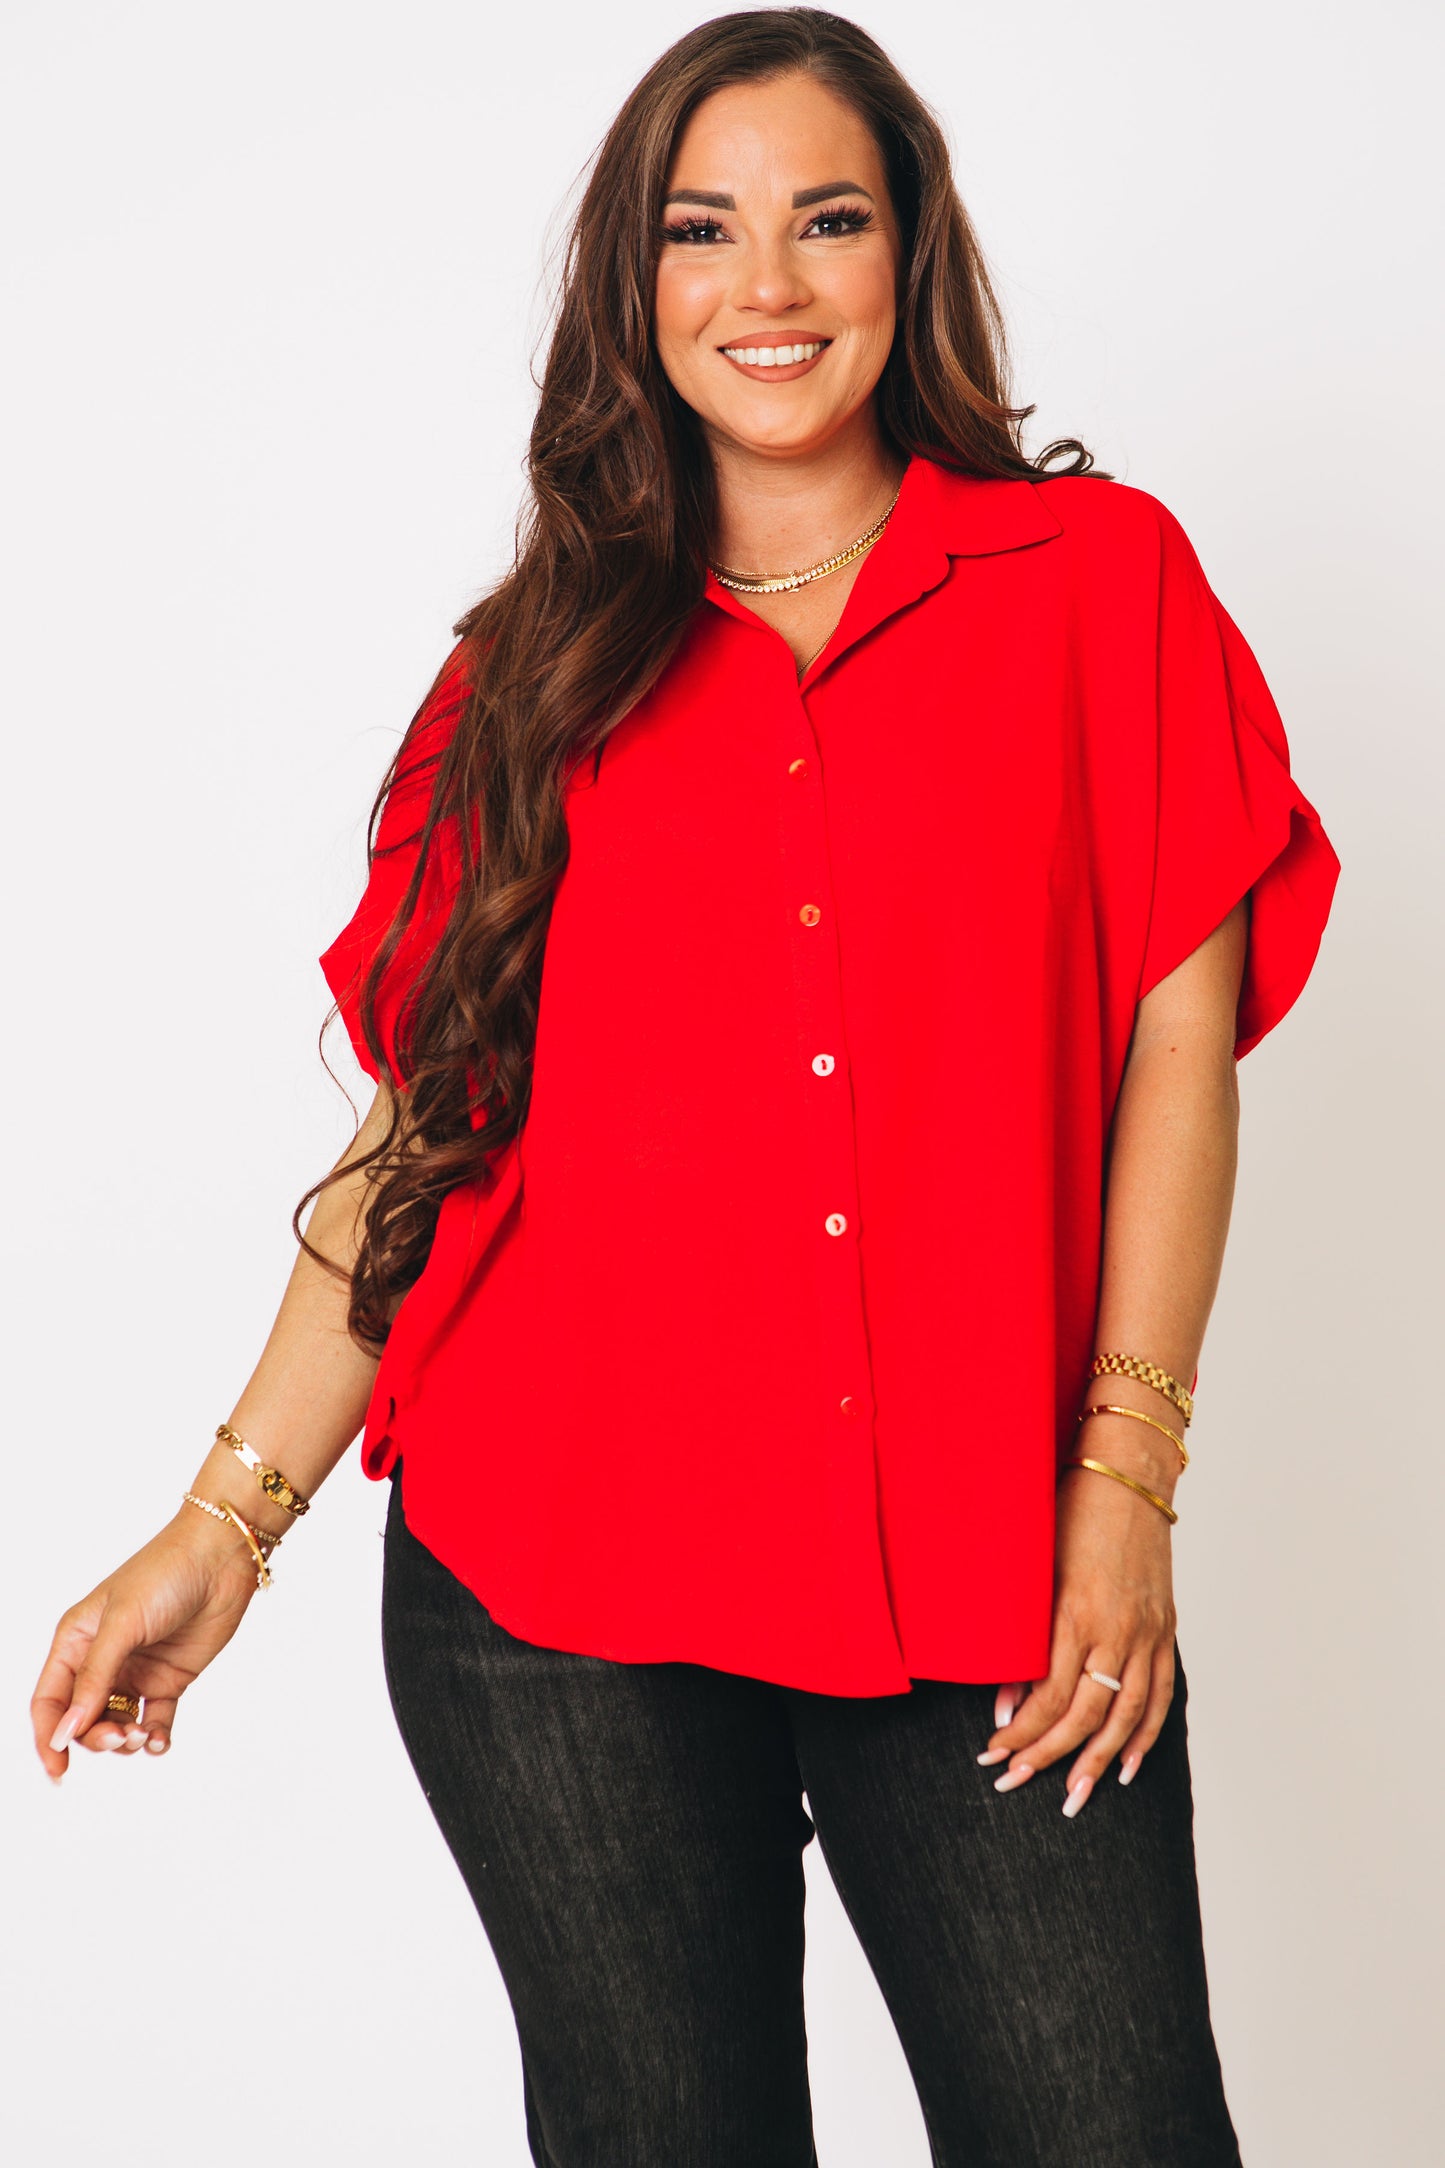 RESTOCKED - Best Boyfriend Fit Solid Collared Button-Up Top (S-L)